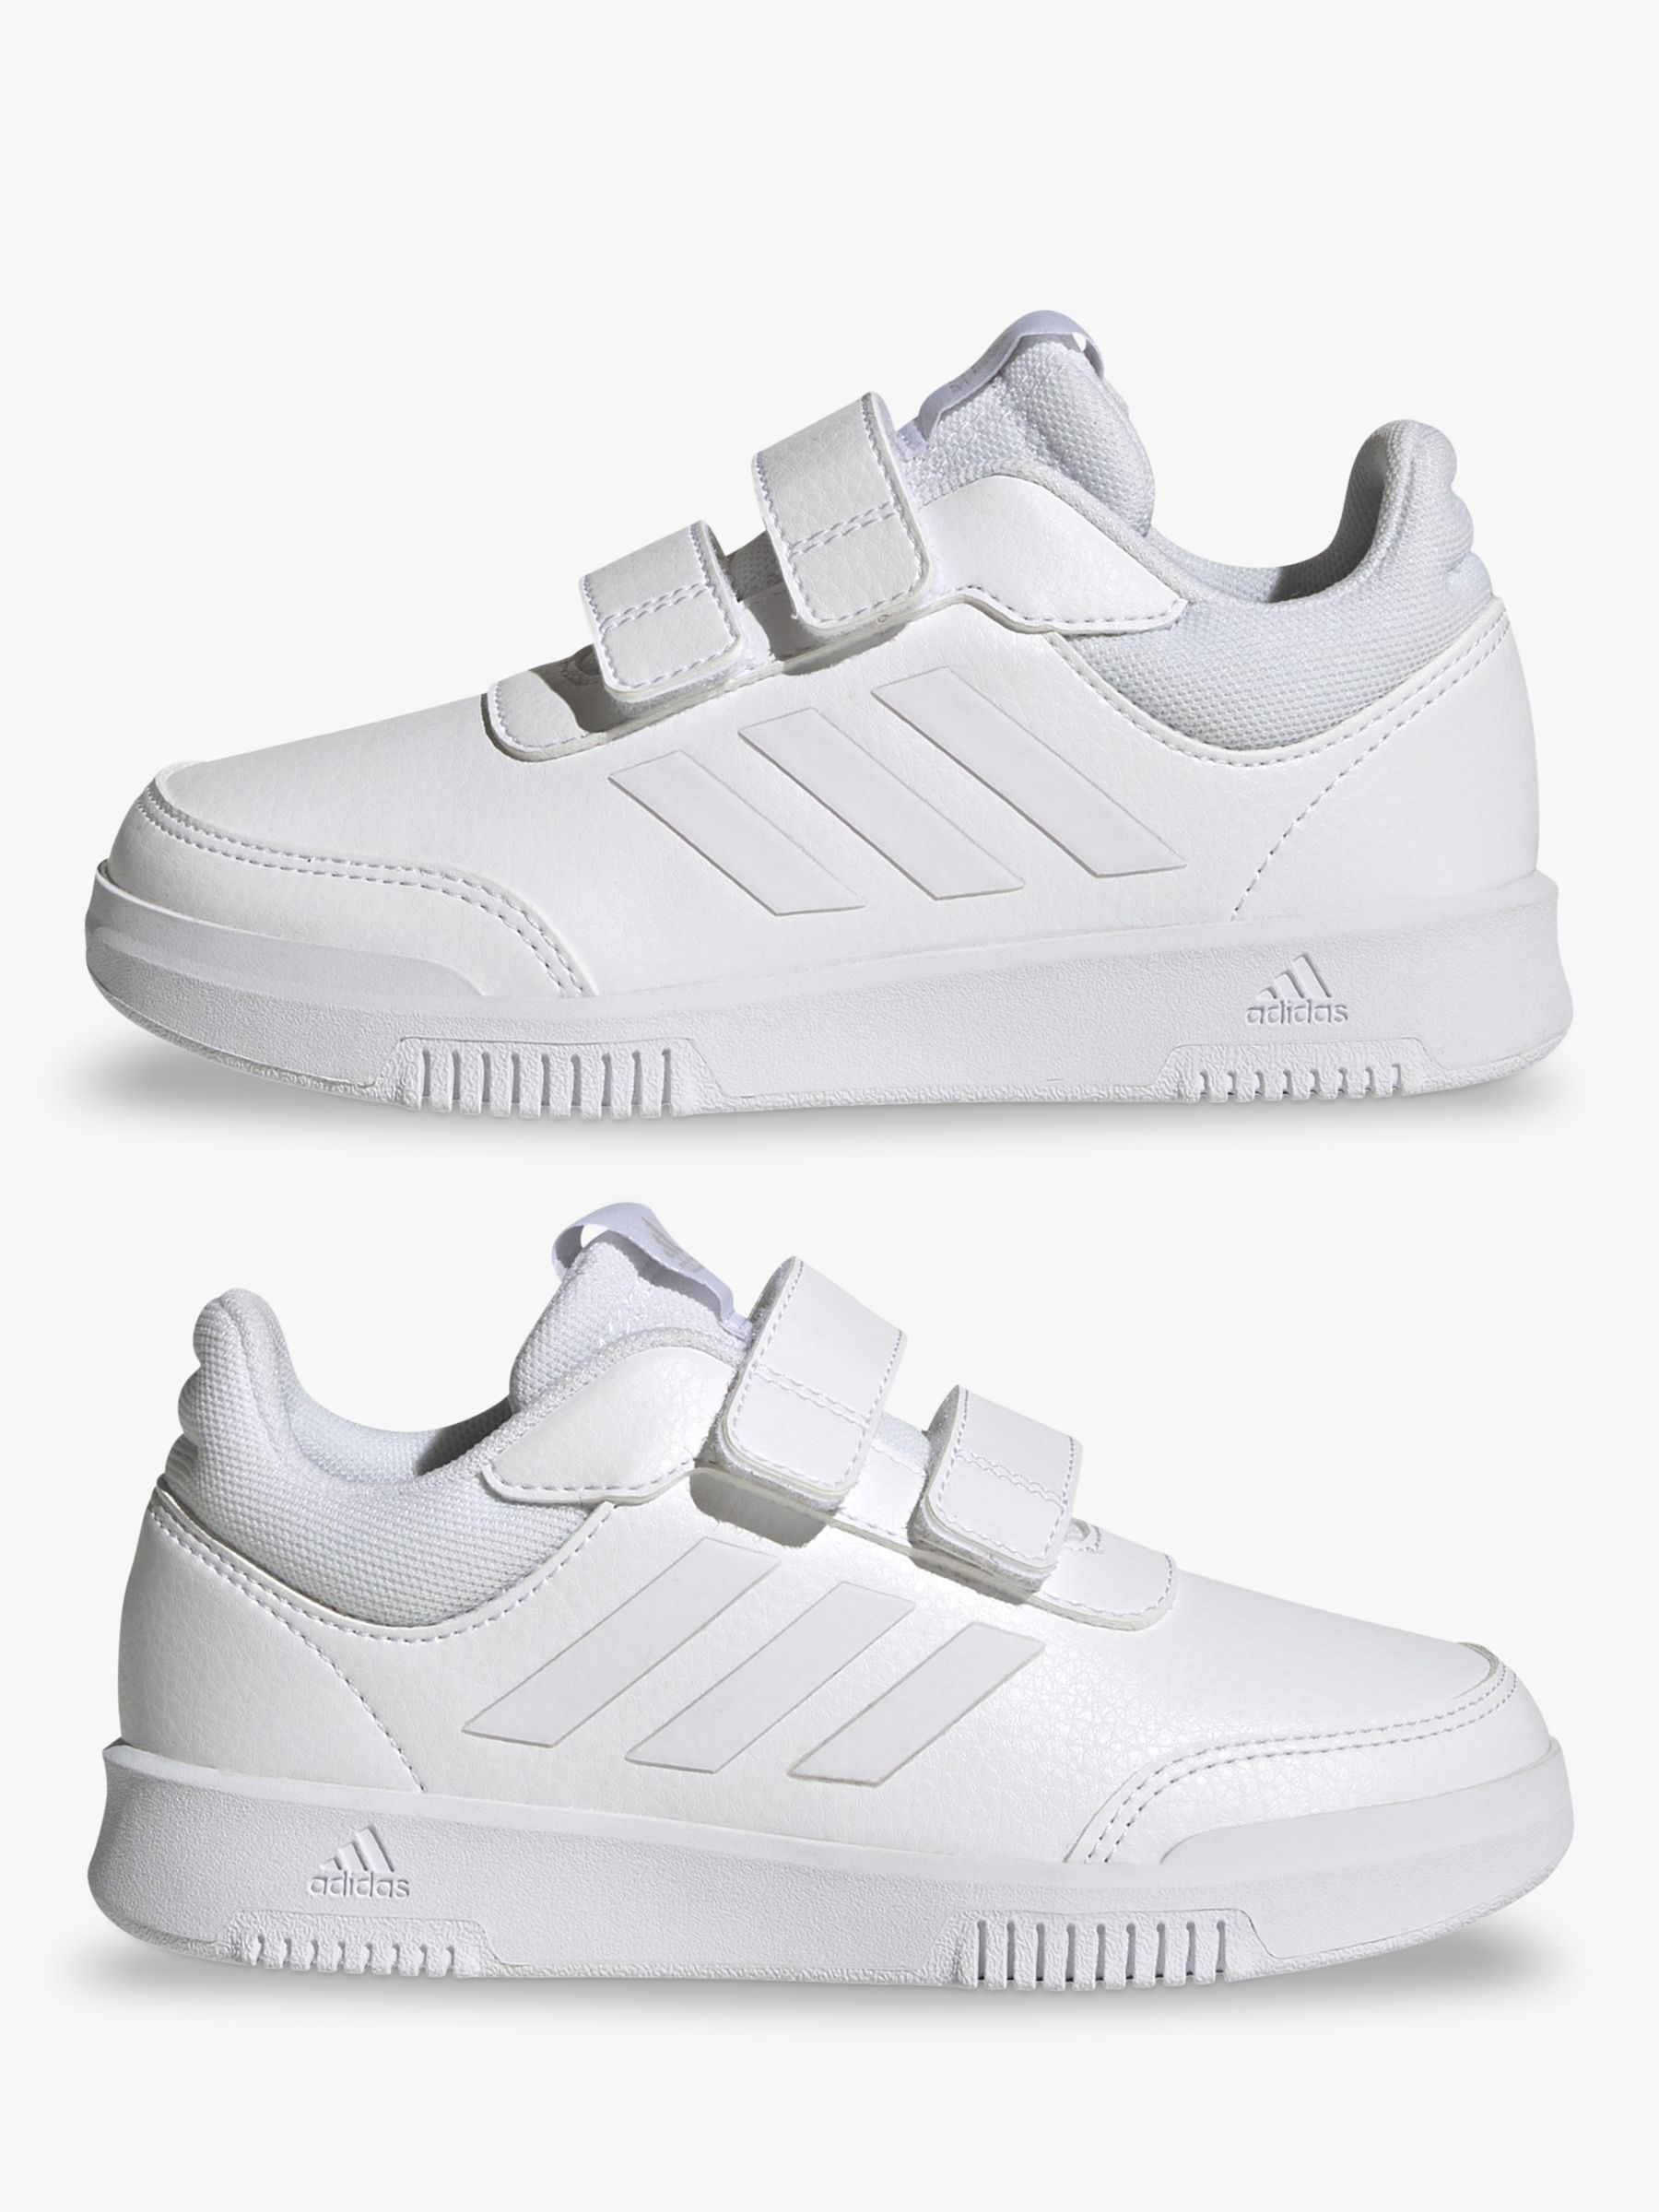 Quality Adidas Sneakers in Victoria Island - Shoes, shop with oga